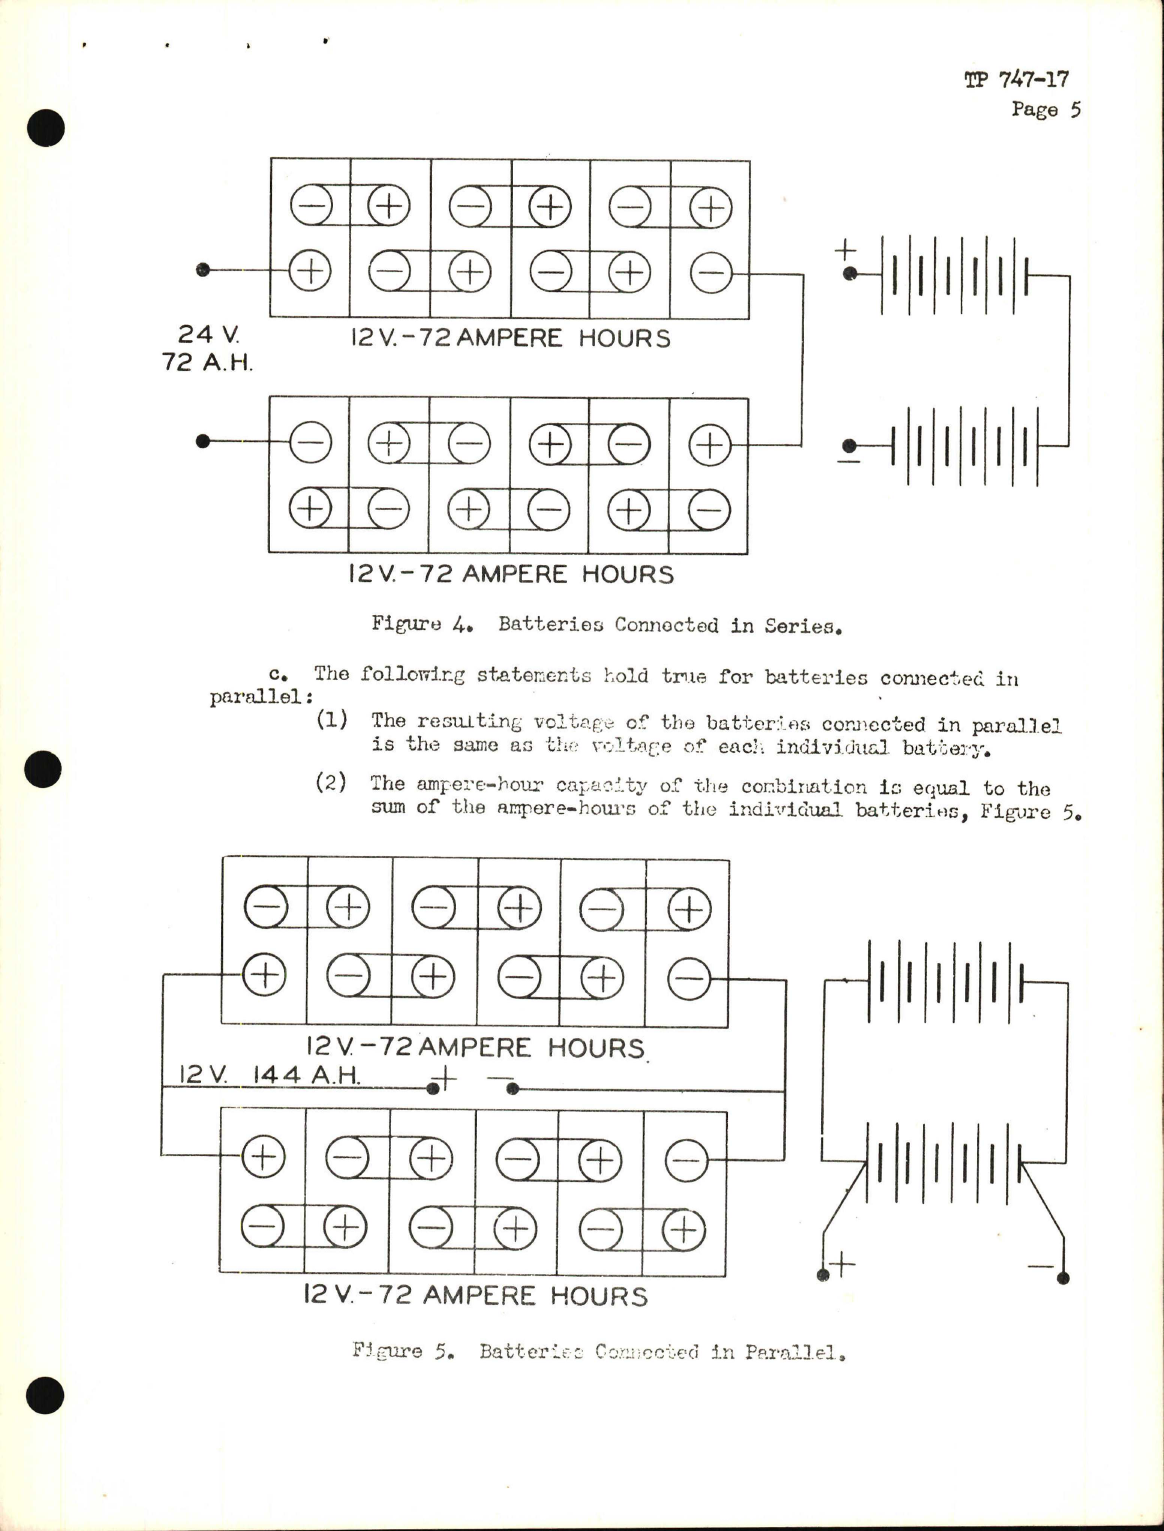 Sample page 5 from AirCorps Library document: Training Project, Dry Cells and Storage Batteries